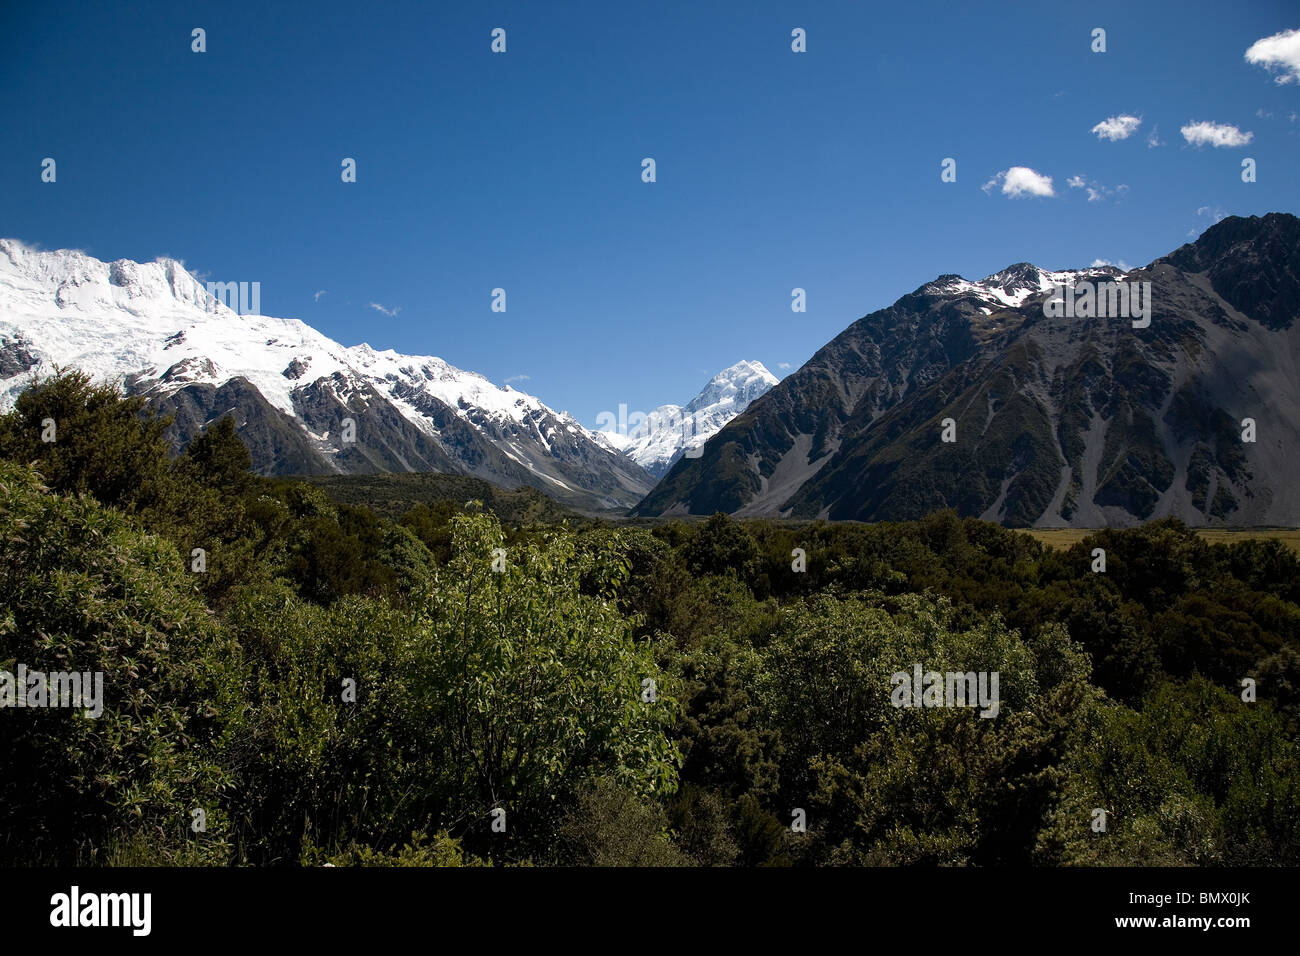 Mount Cook peak seen over the tree tops of the valley. Stock Photo